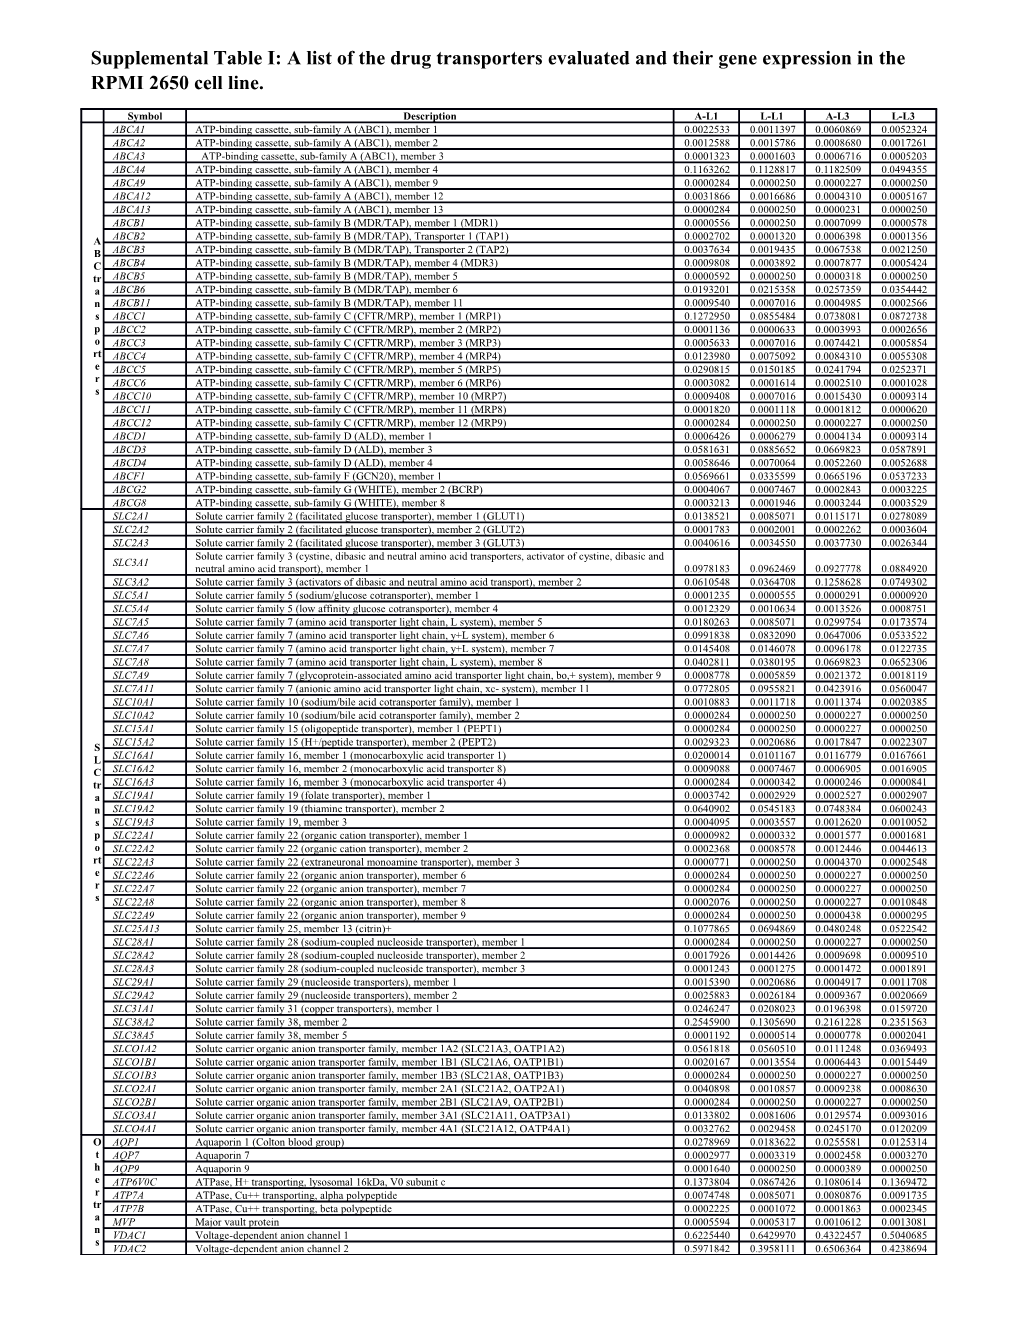 Supplemental Table I: a List of the Drug Transporters Evaluated and Their Gene Expression